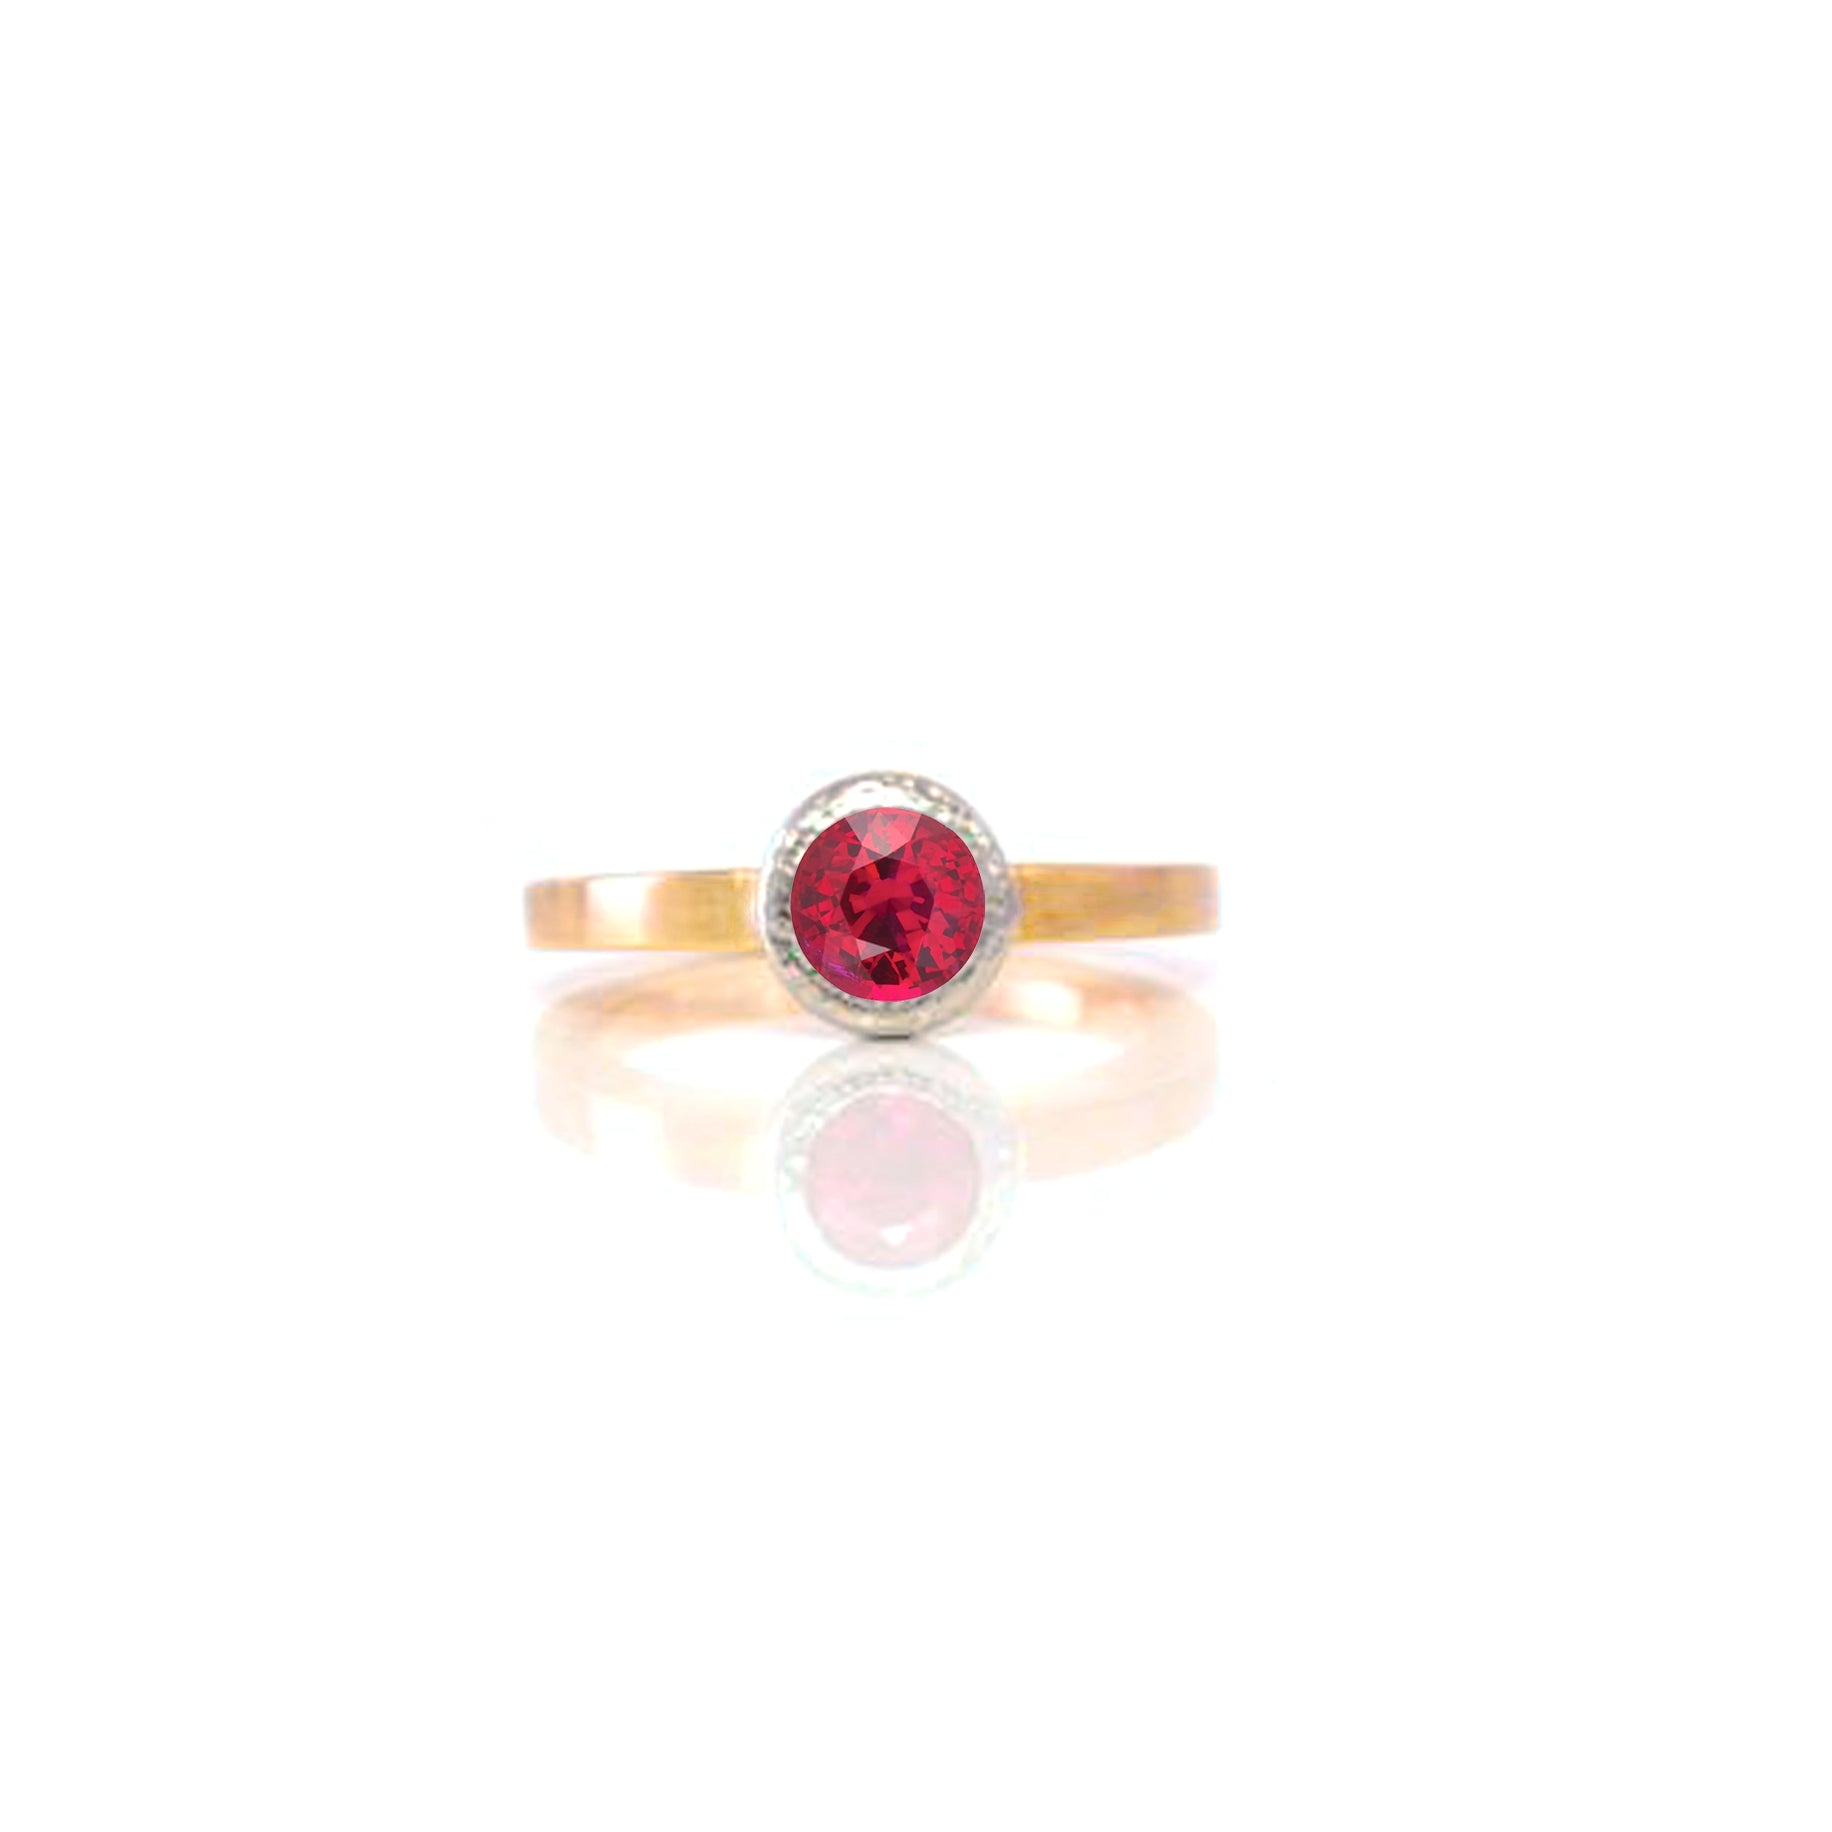 Planished stacker ruby ring in 18kt white and yellow gold , by ZEALmetal, Nicole Horlor, in Kingston, ON, Canada